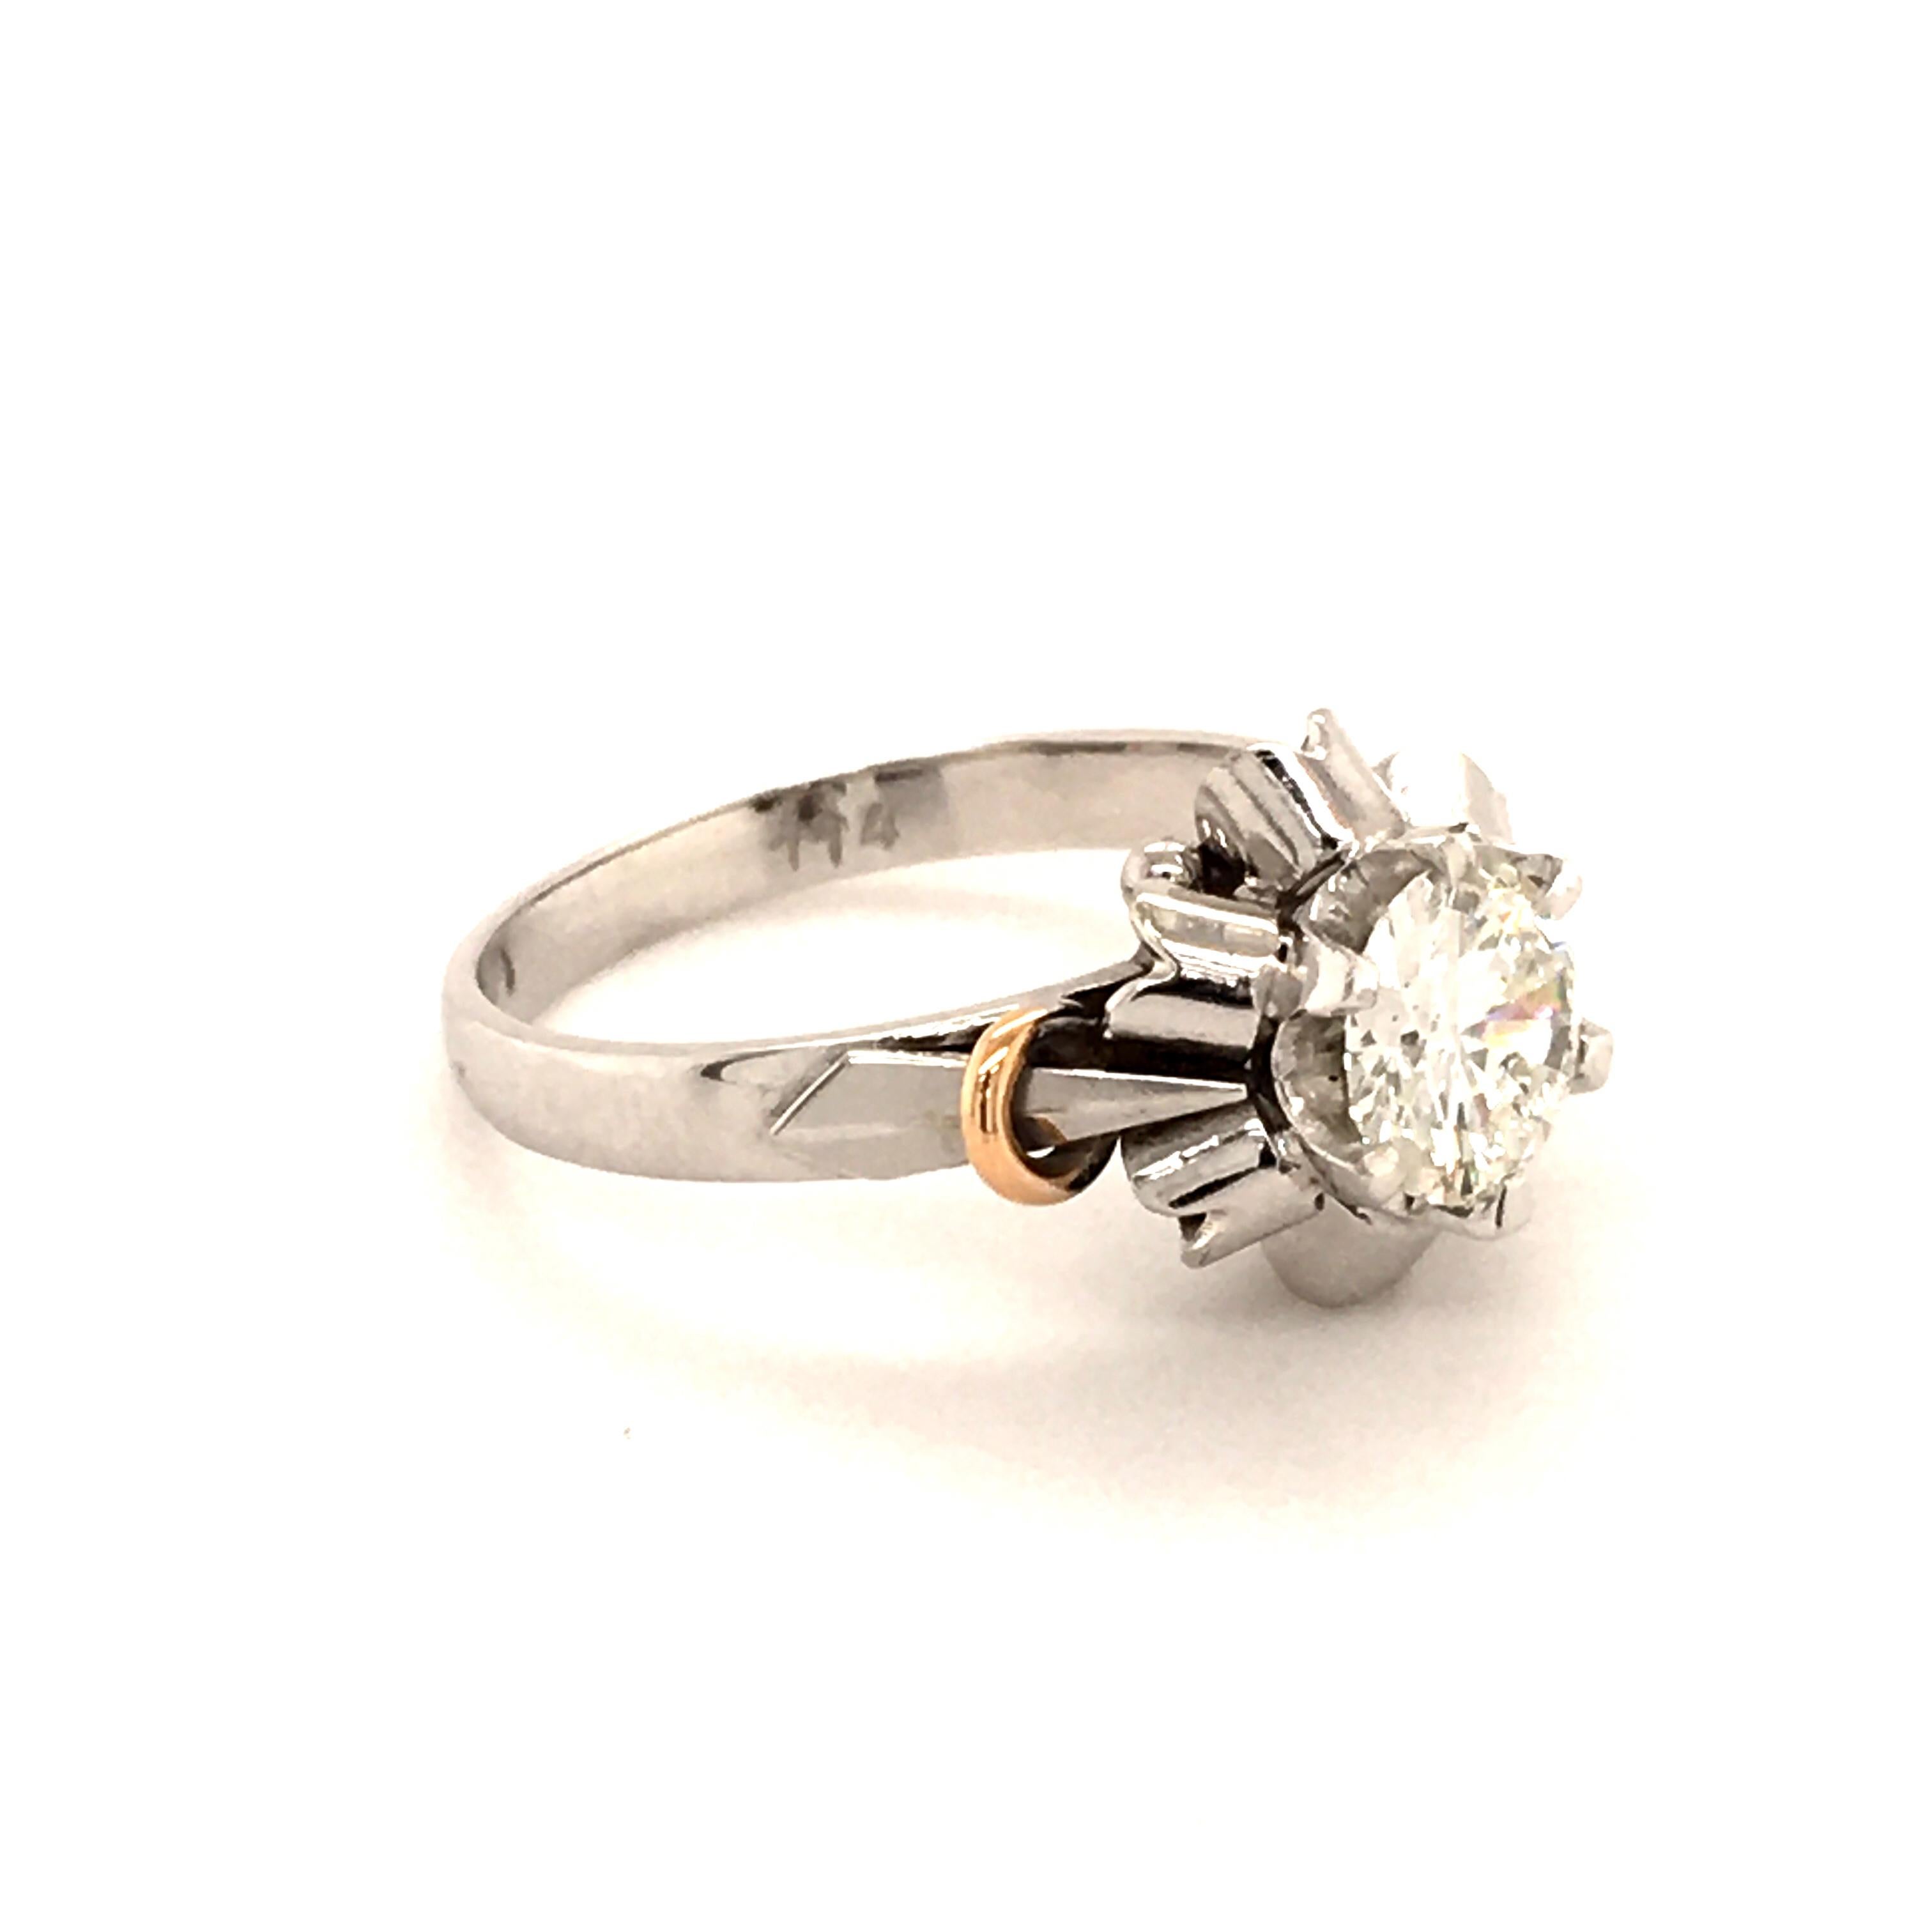 This very pretty and playful ring is set in six prongs with a 1.14 ct, G-I1, round brilliant-cut diamond. Designed with six elements surrounding the center stone resembling a stylized ballerina skirt. The two arcs in red gold on each side of the